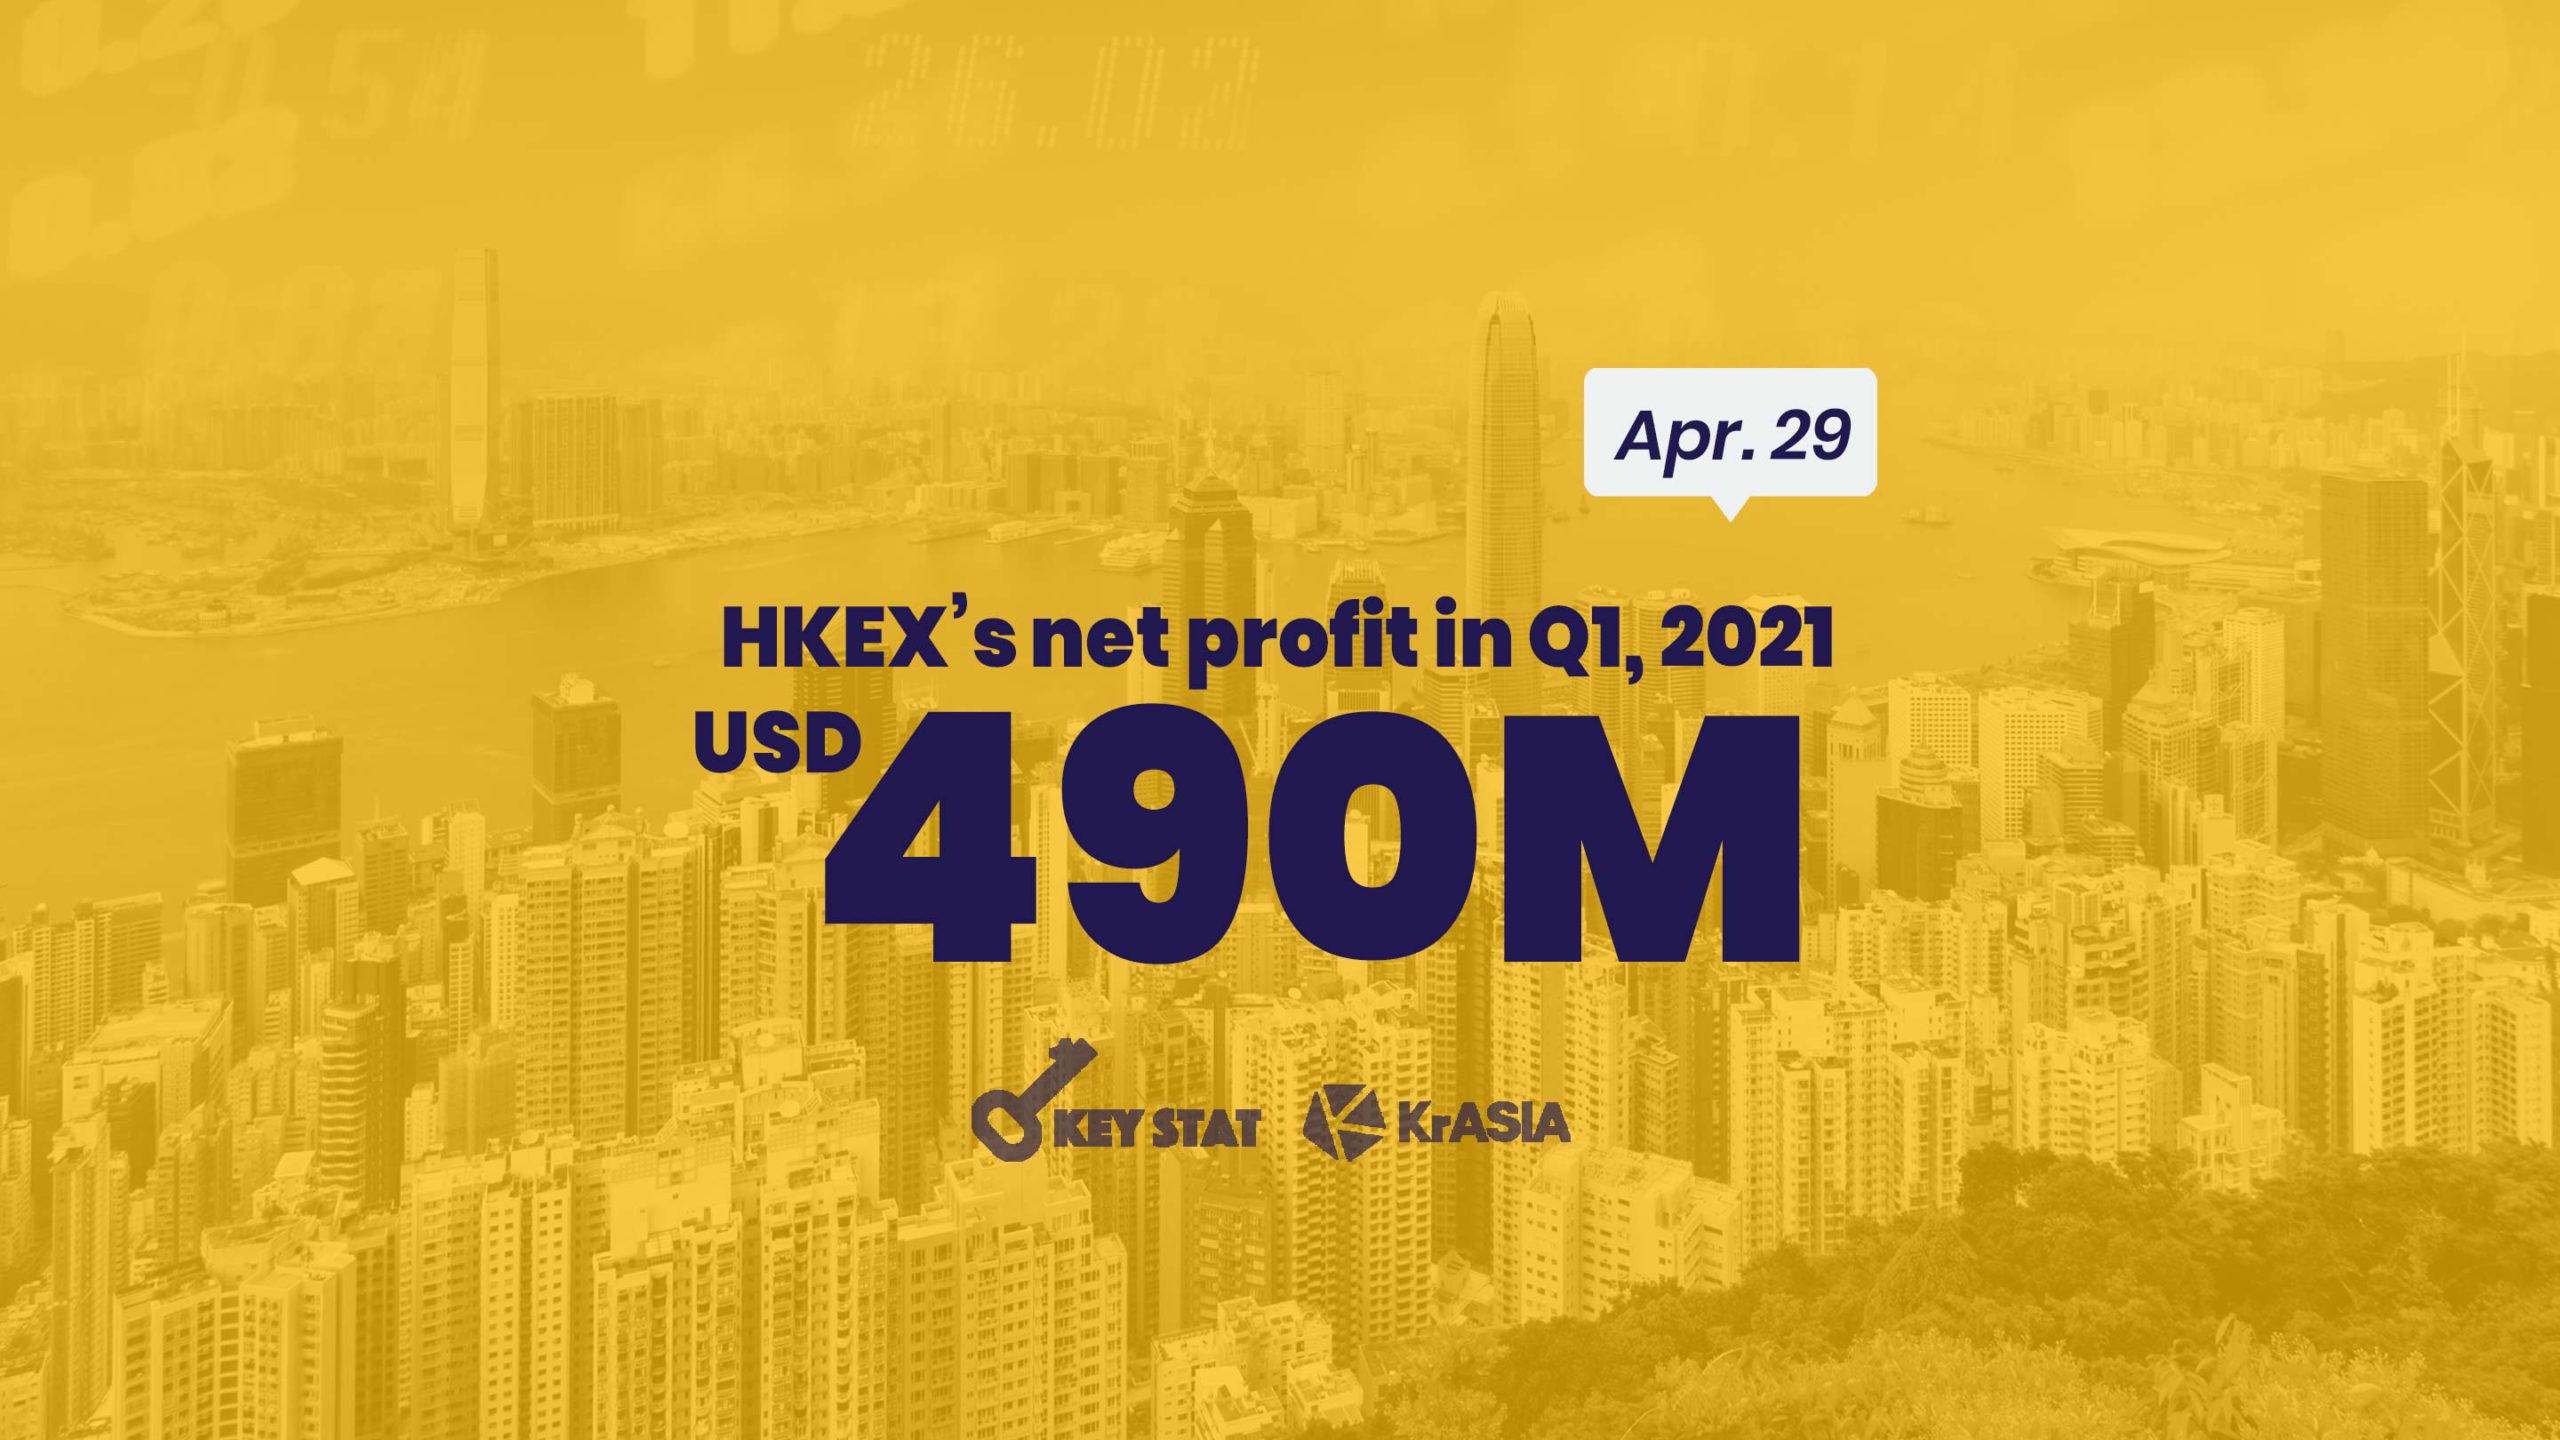 KEY STAT | HKEX posts best-ever Q1 results on the back of strong tech IPO pipeline